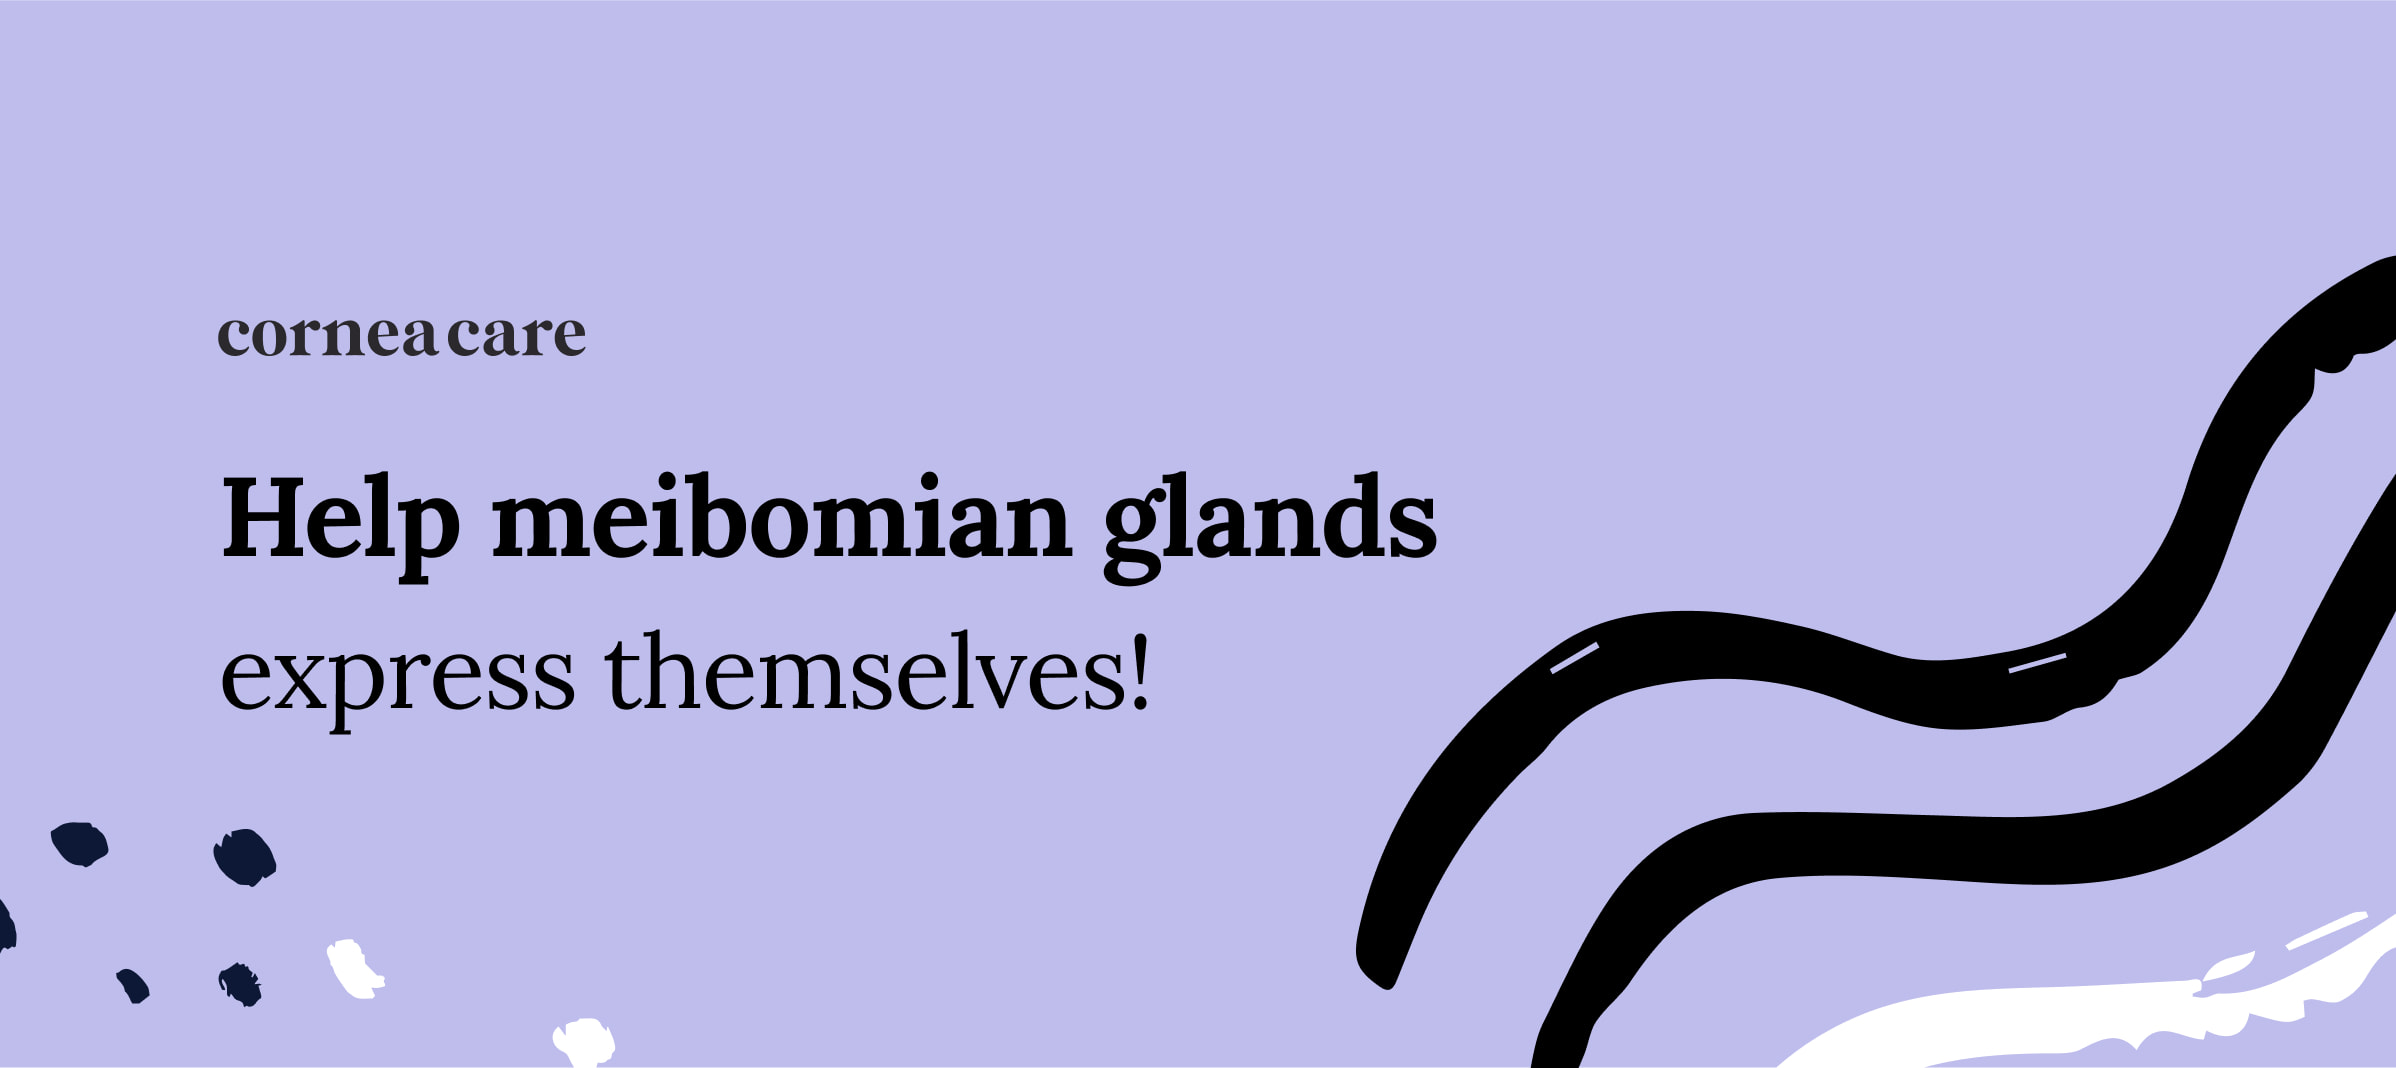 Alternatives to expressing meibomian glands